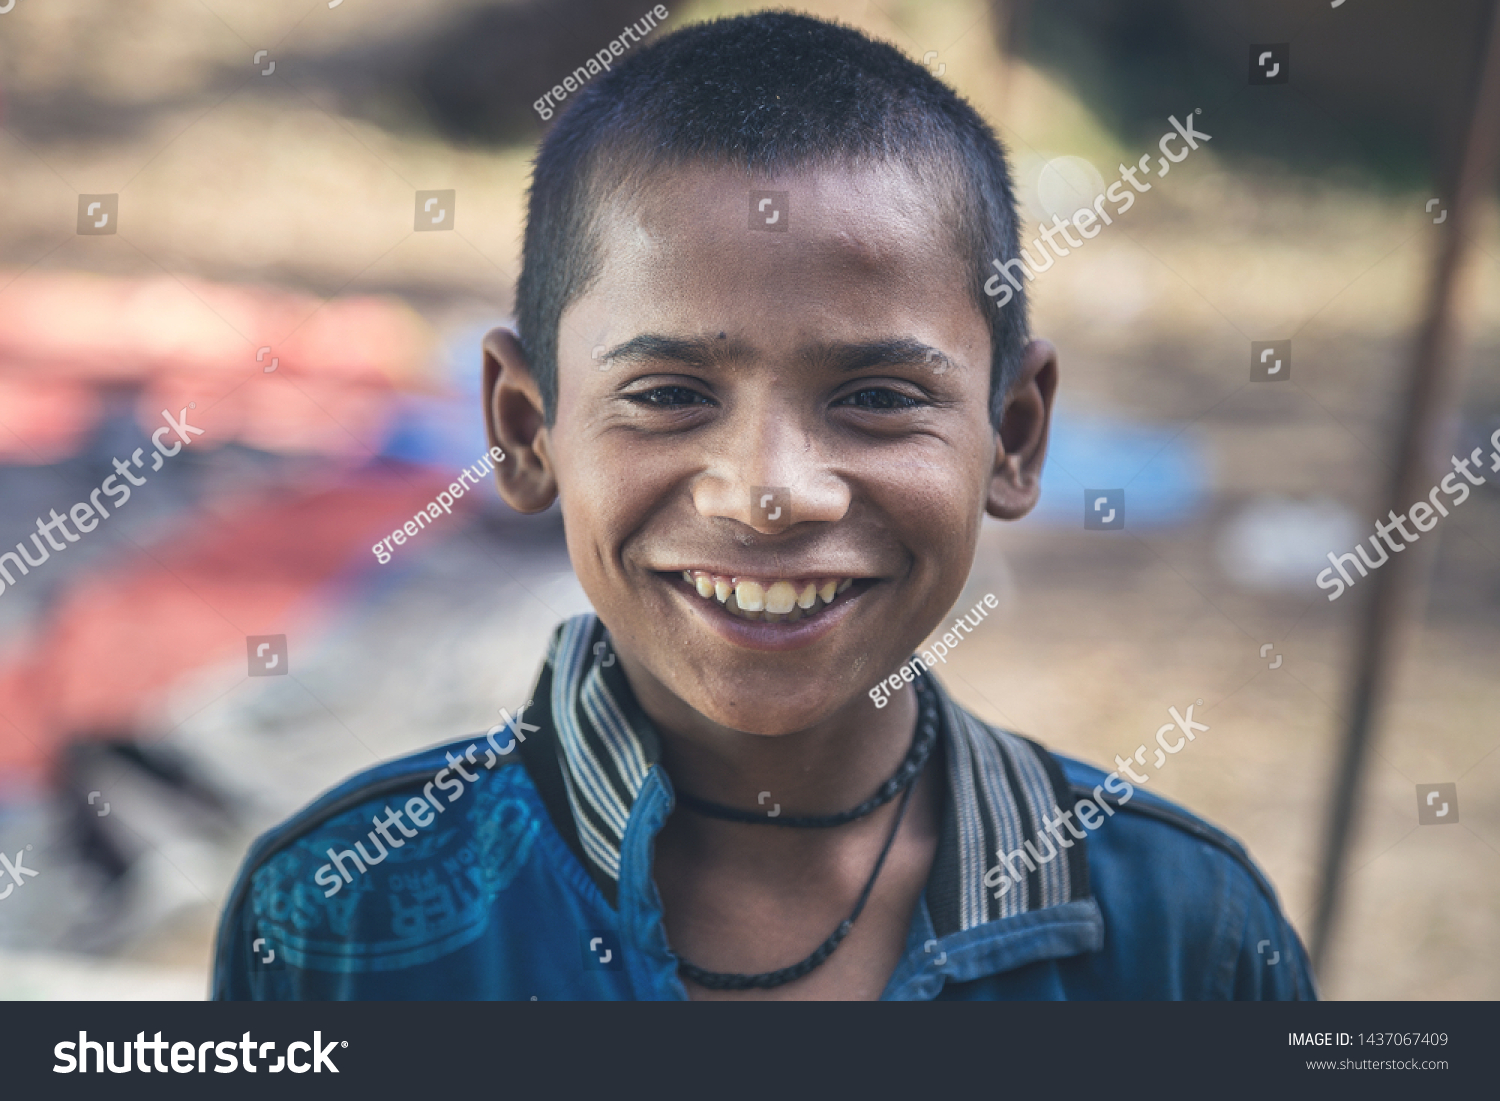 A portrait of a poor innocent Indian boy from a village #1437067409